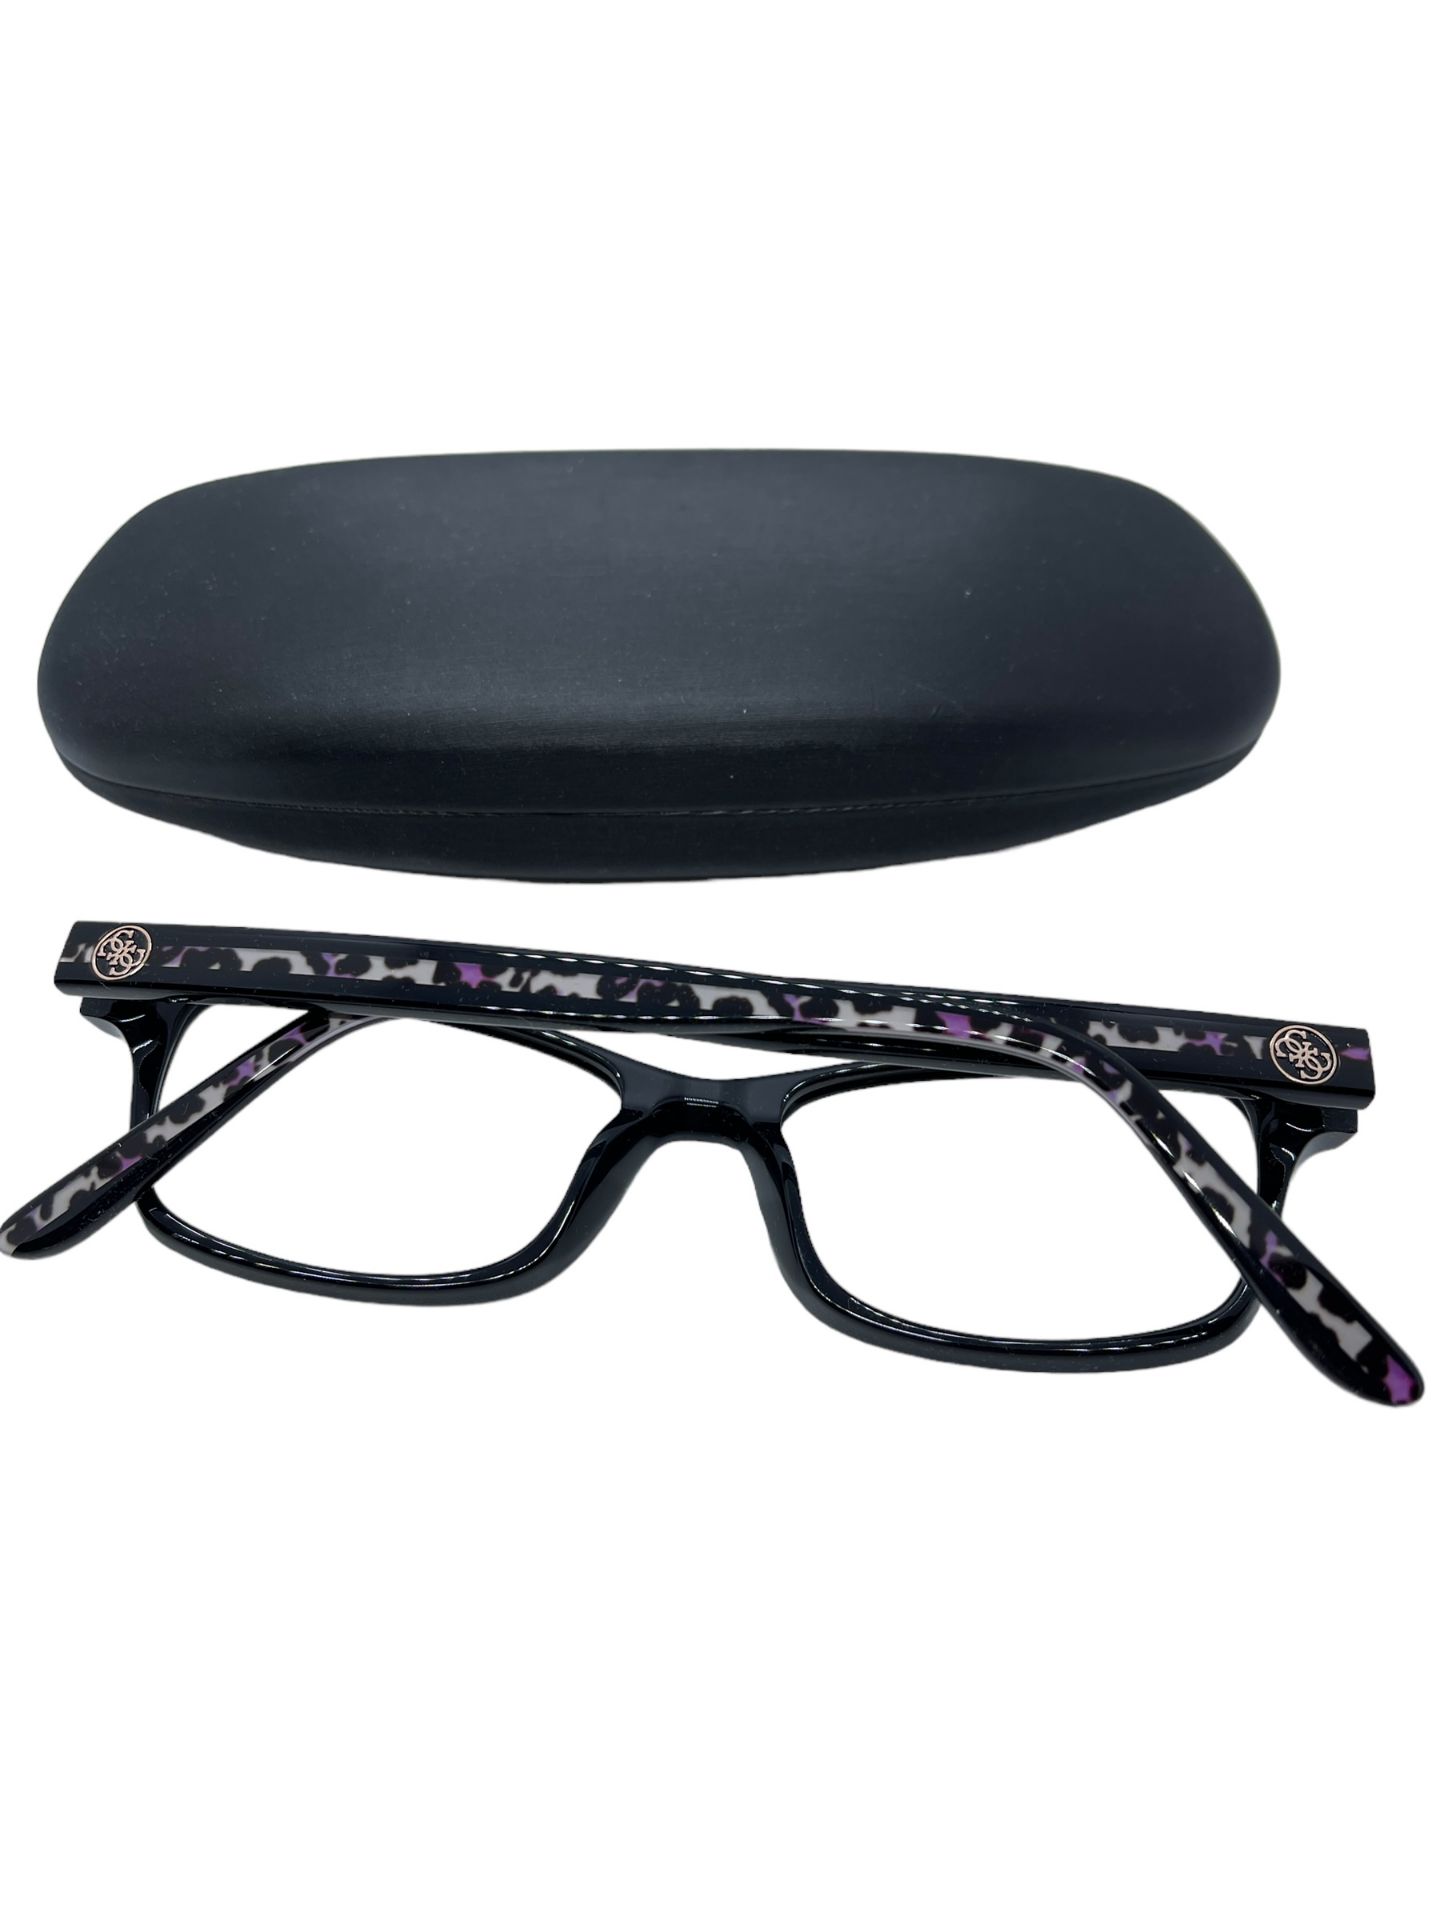 GUESS LADIES SPECTACLES XDEMO - Image 3 of 3